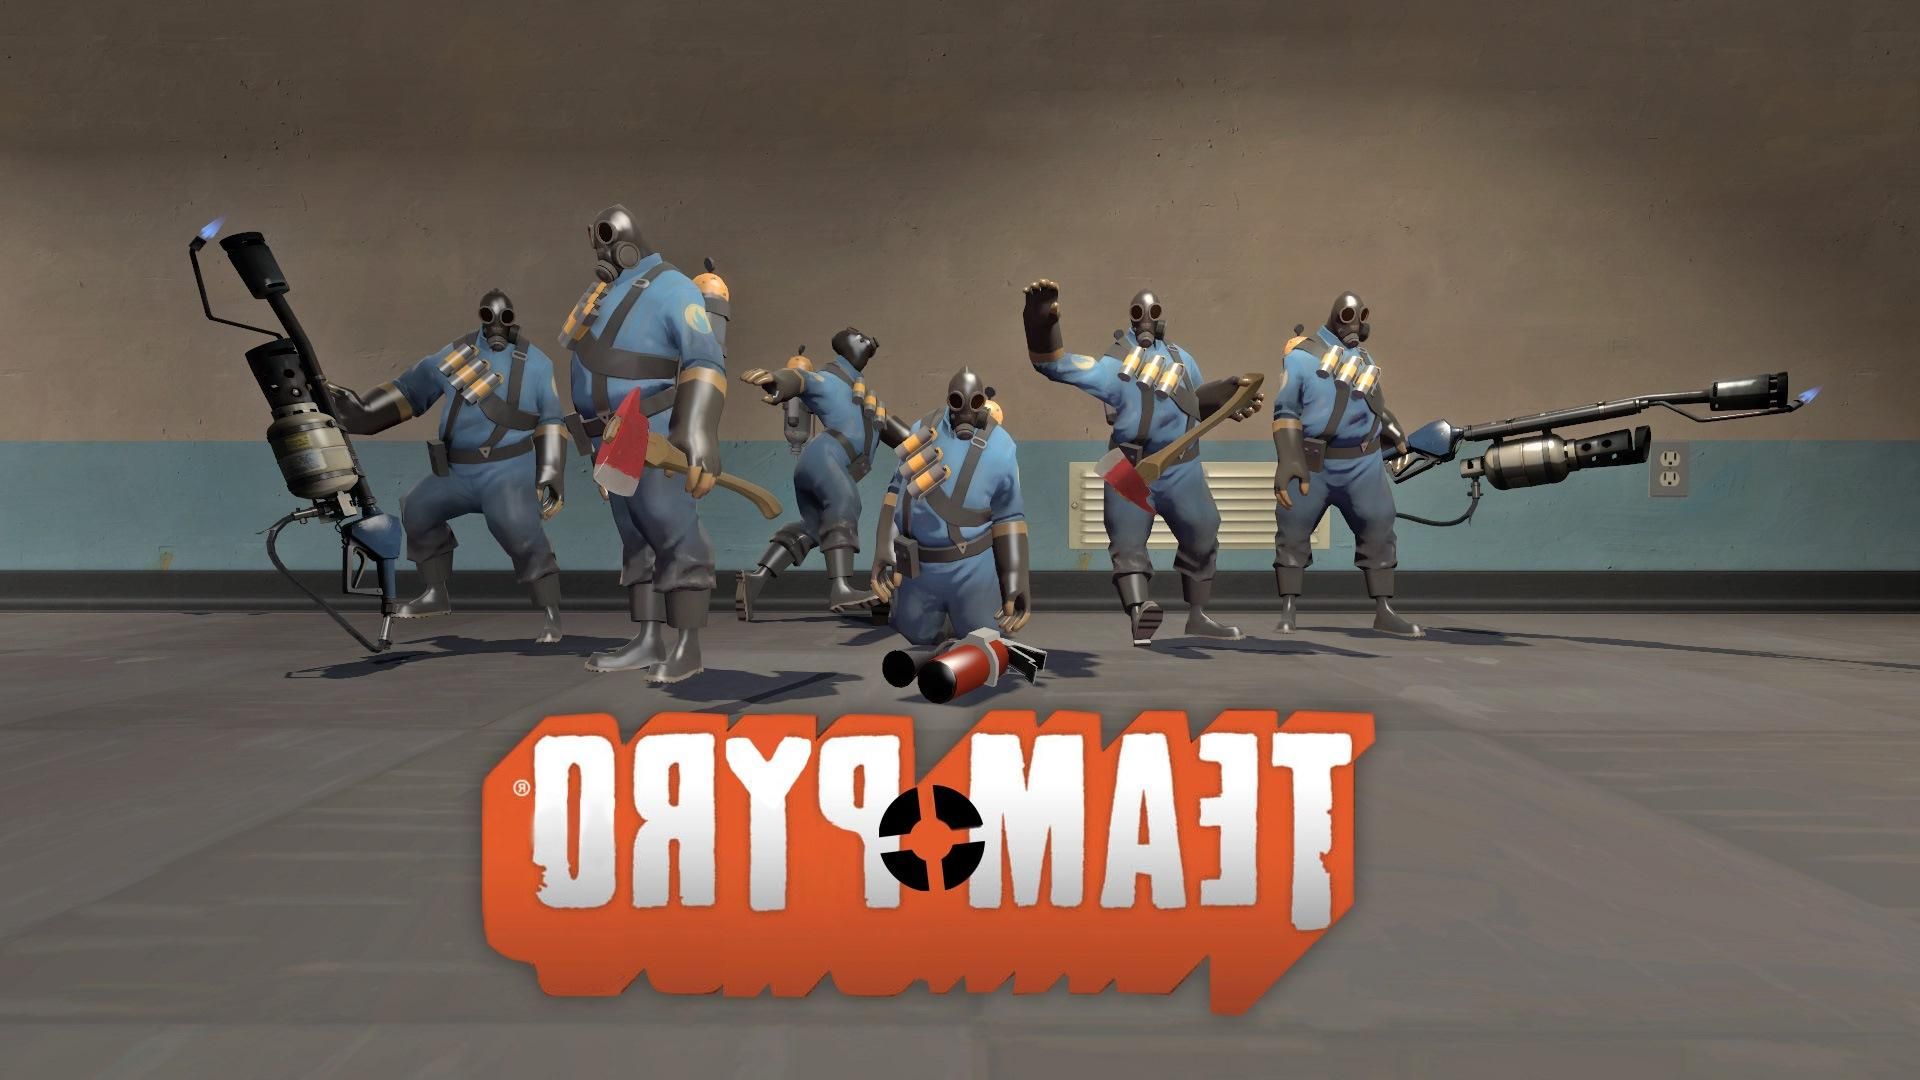 Tf2 1920X1080 Wallpapers